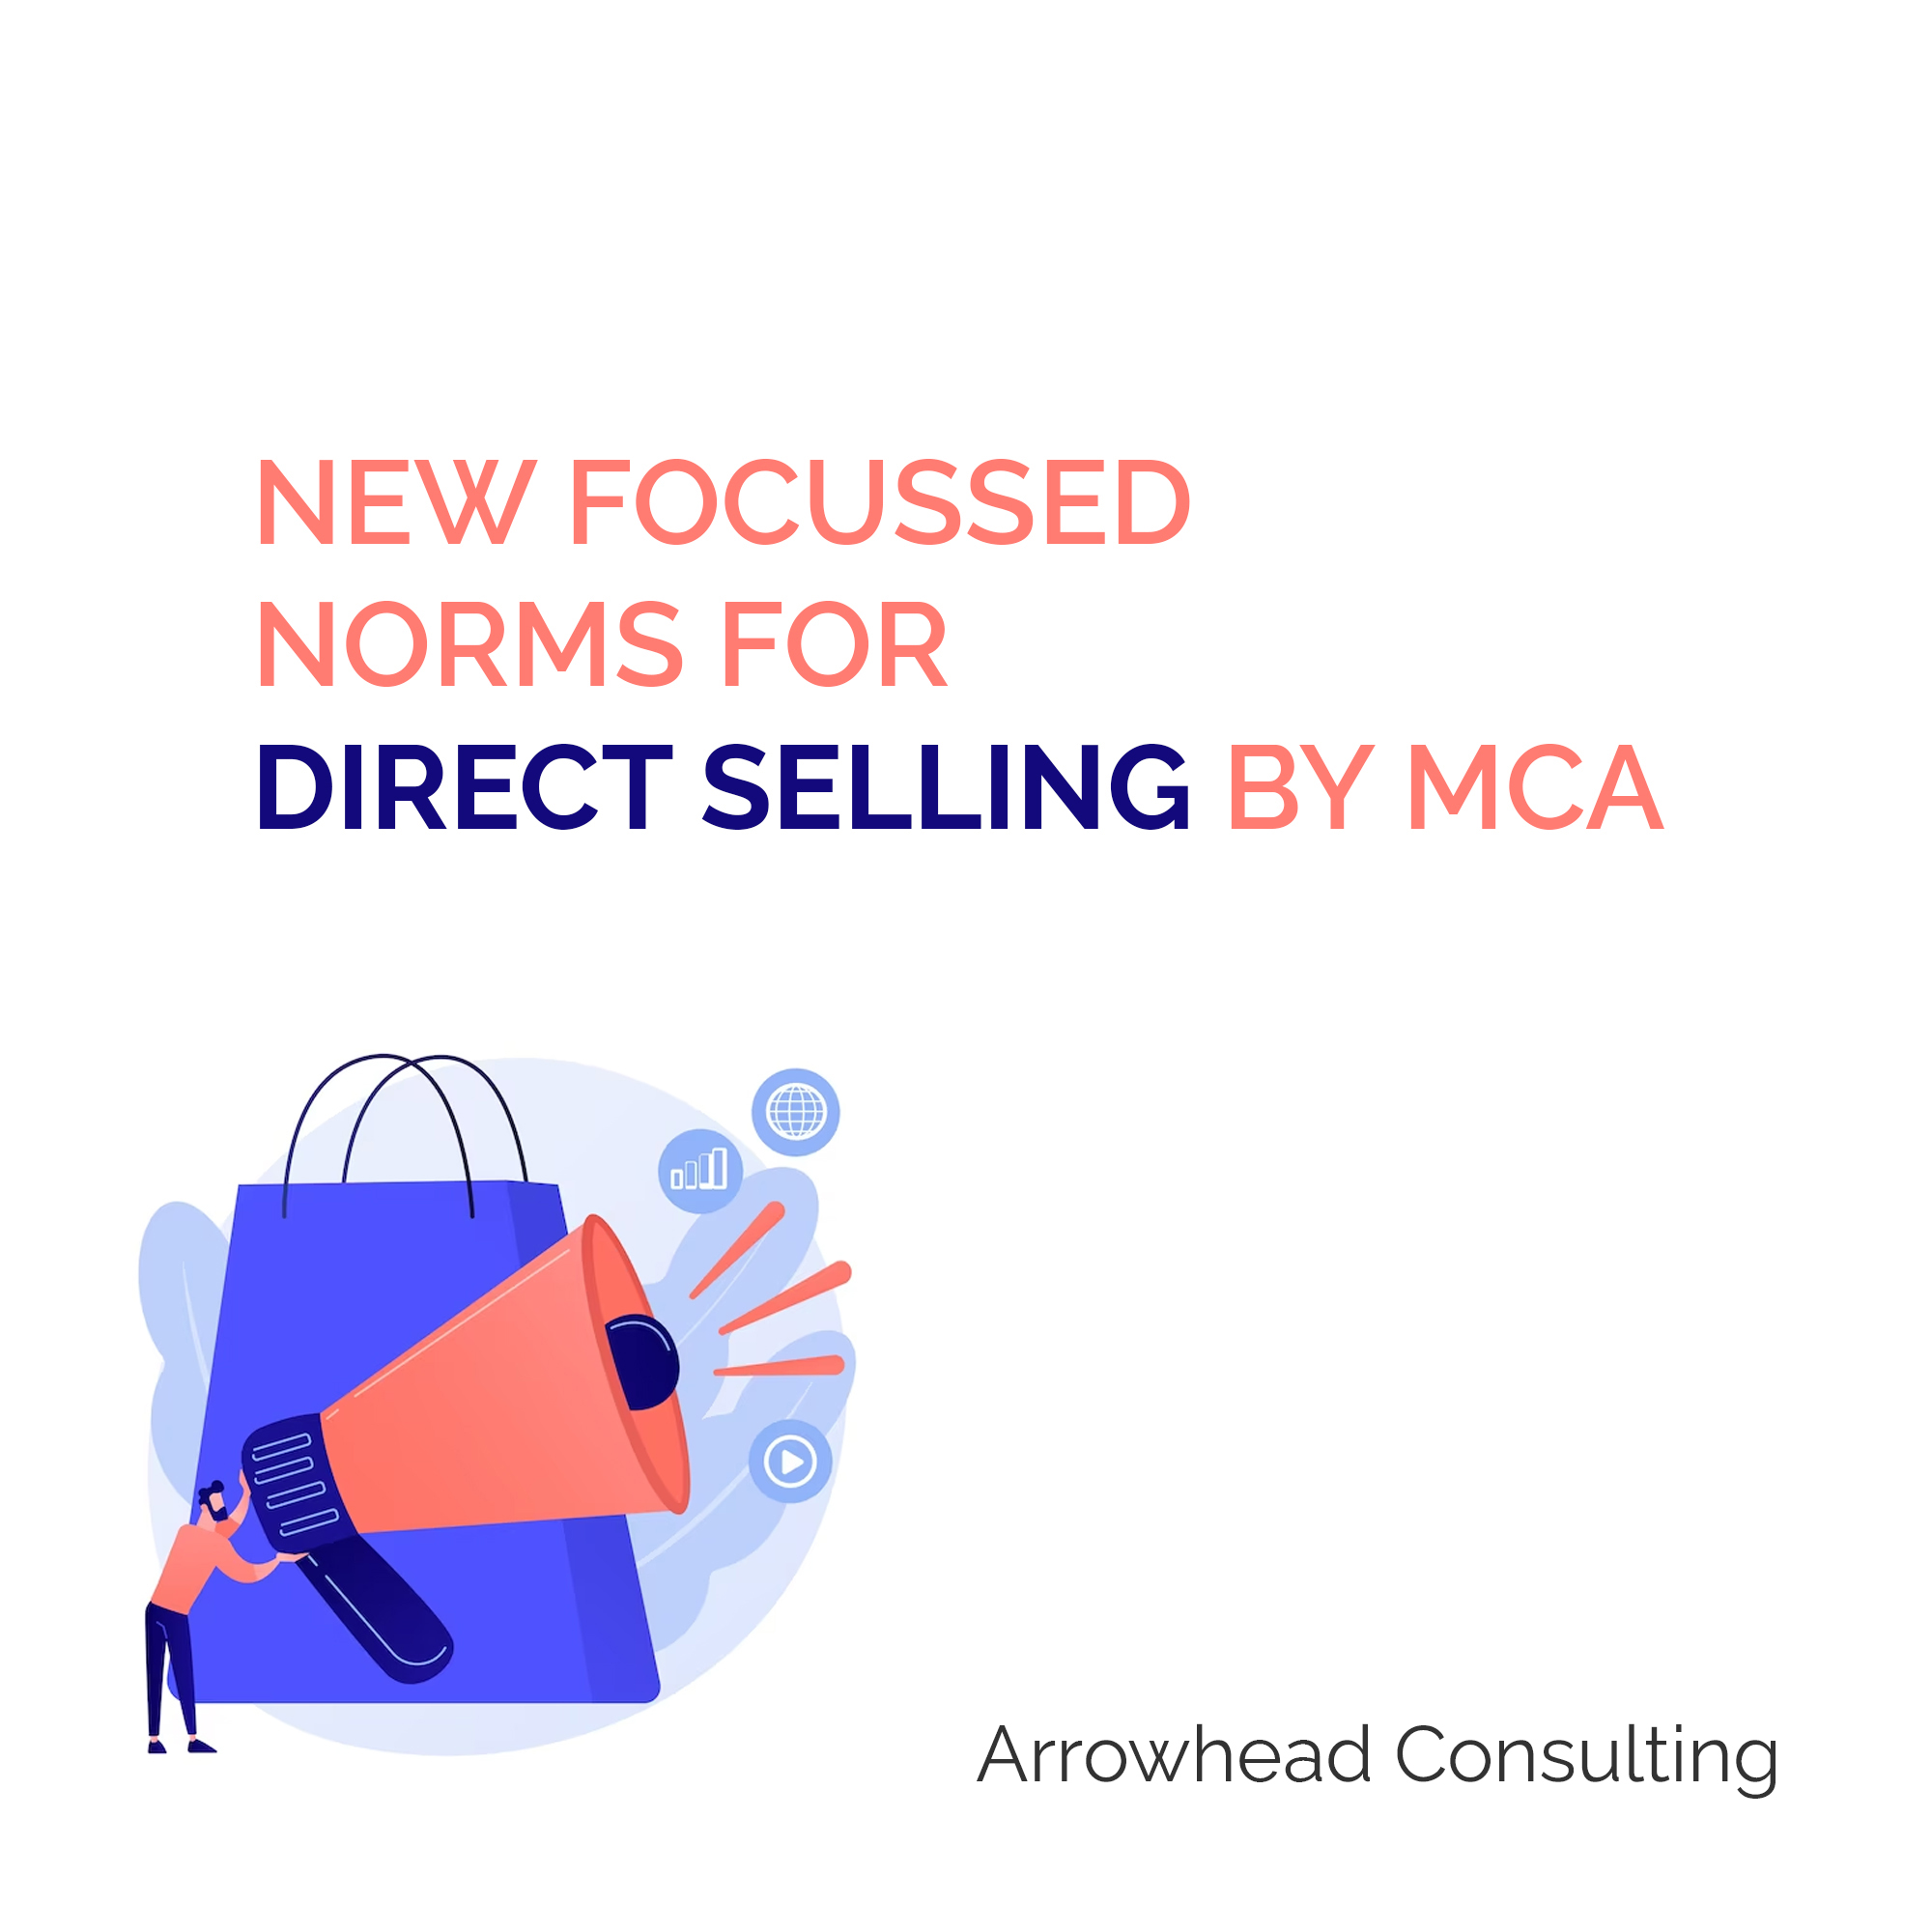 You are currently viewing New Focussed Norms for Direct Selling by MCA